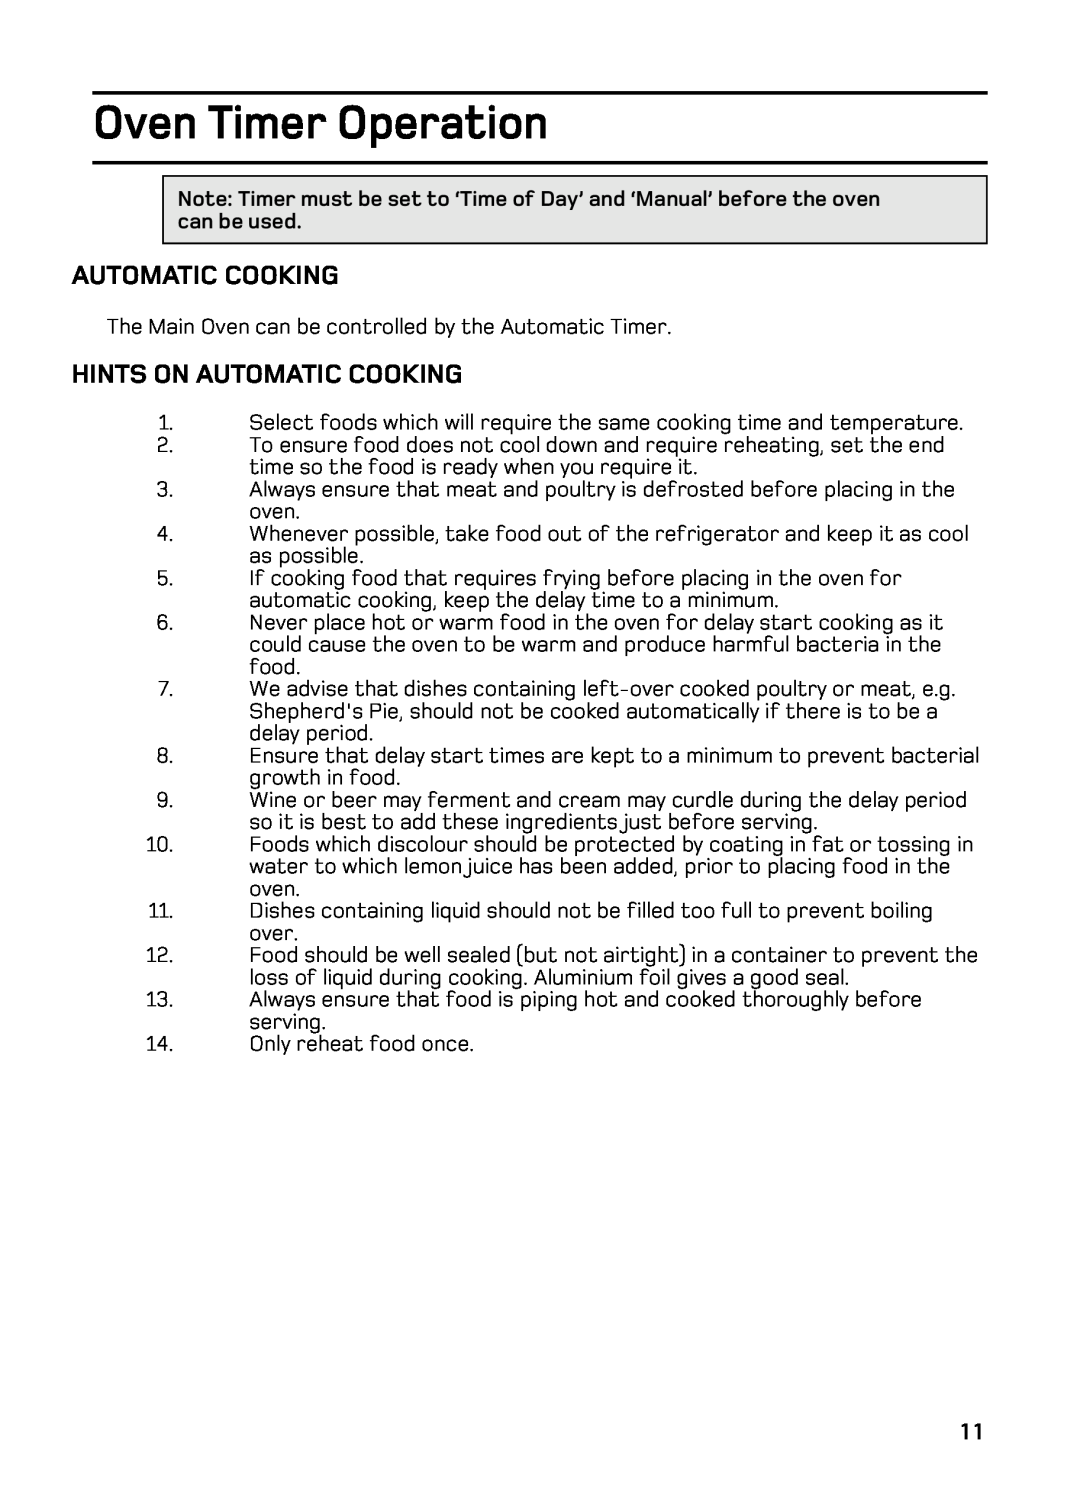 Hotpoint double oven cookers manual Oven Timer Operation, Hints On Automatic Cooking 